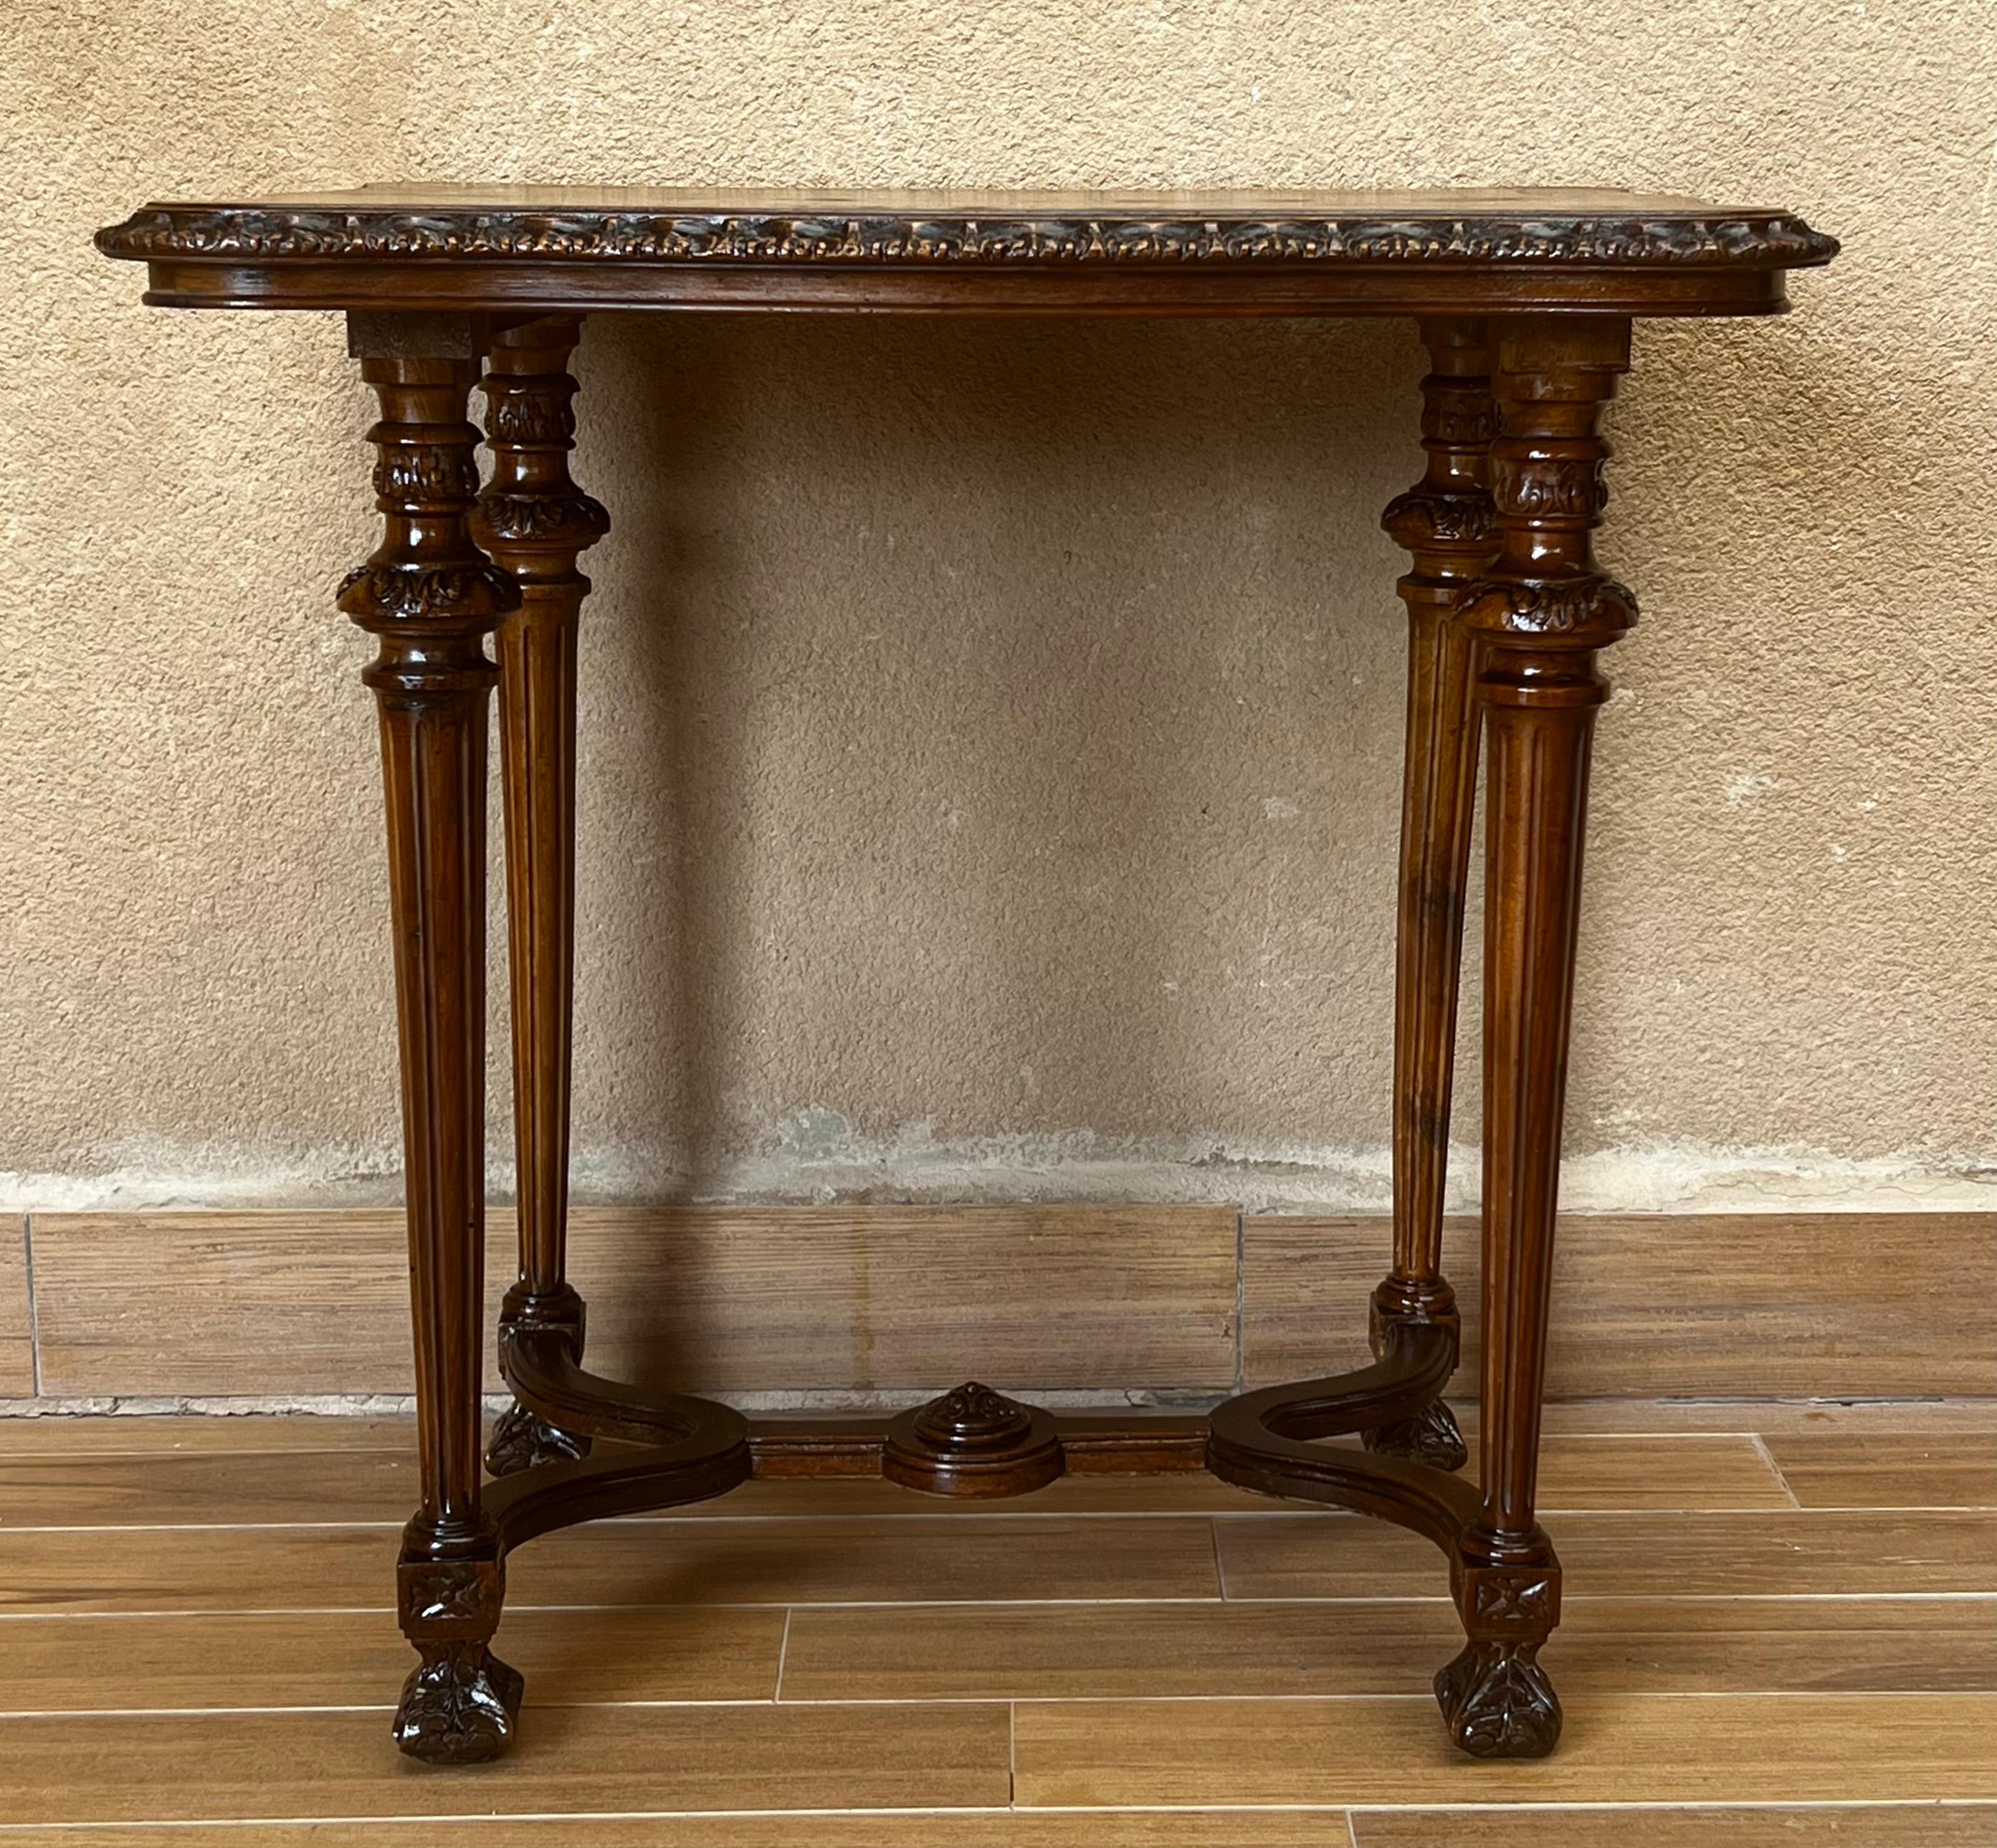 An Italian walnut side table from the 19th century, with carved apron and fluted legs. Created in Spain during the first decade of the 19th century, this walnut side table features a rectangular top with rounded corners, sitting above an apron